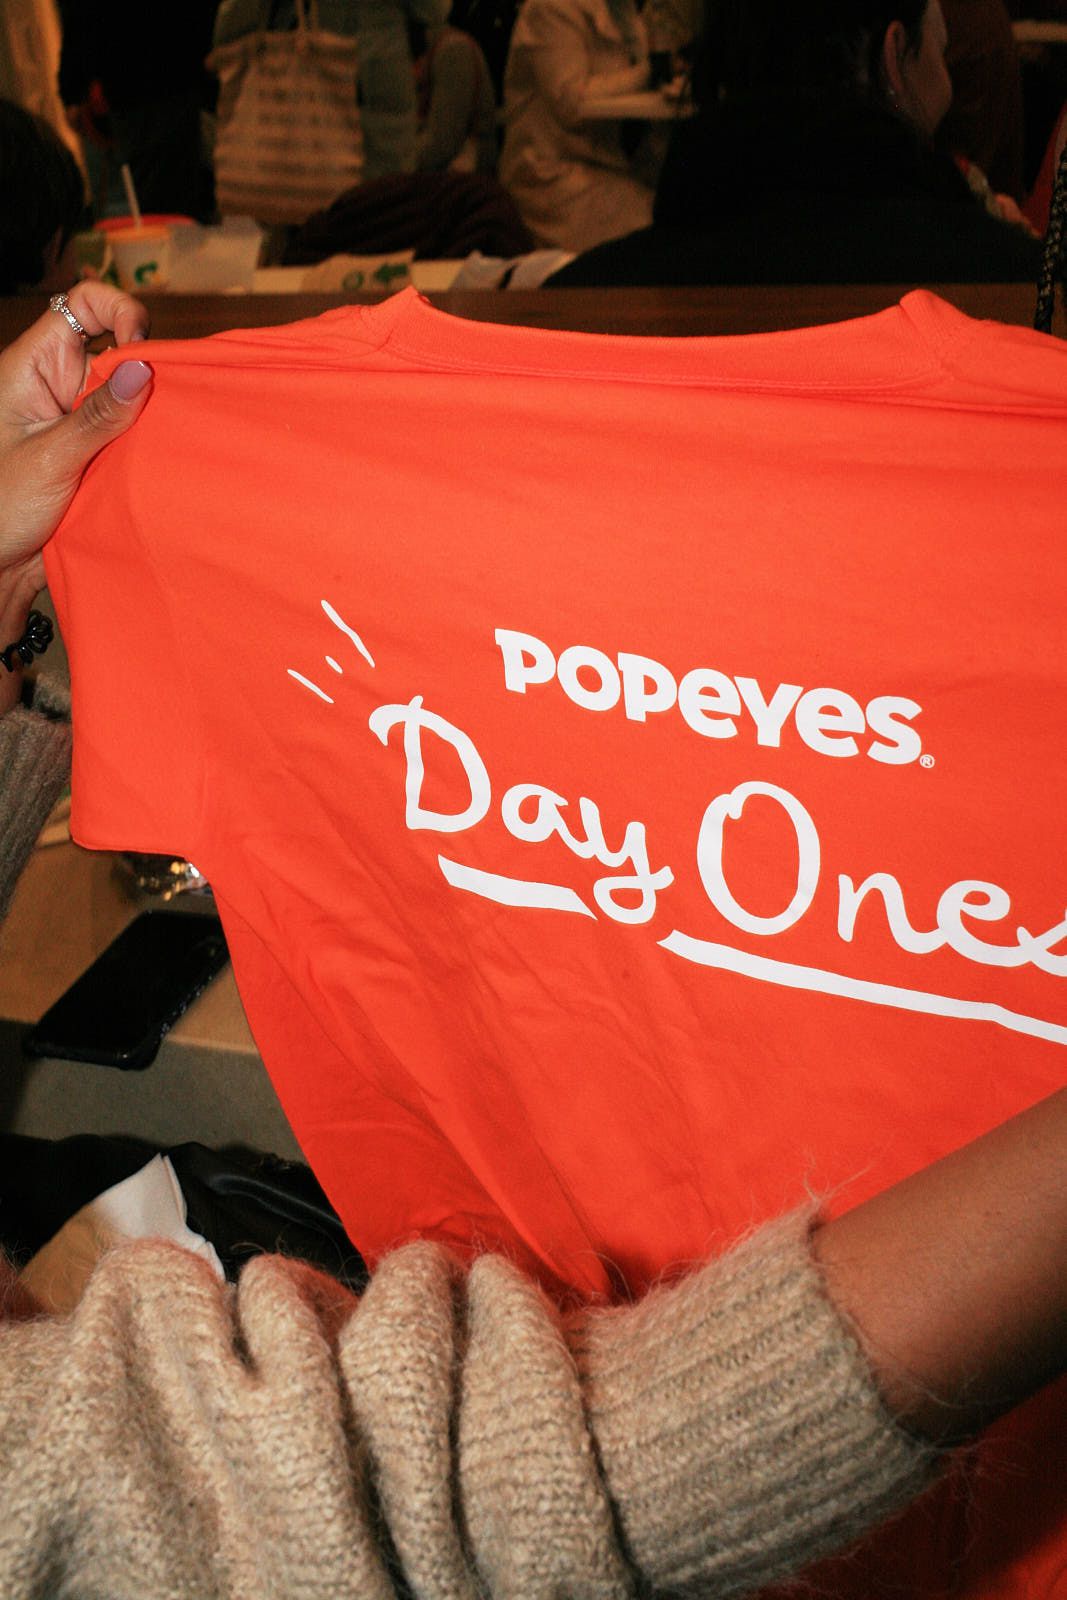 Popeyes London Day One merch for those who wanted that 